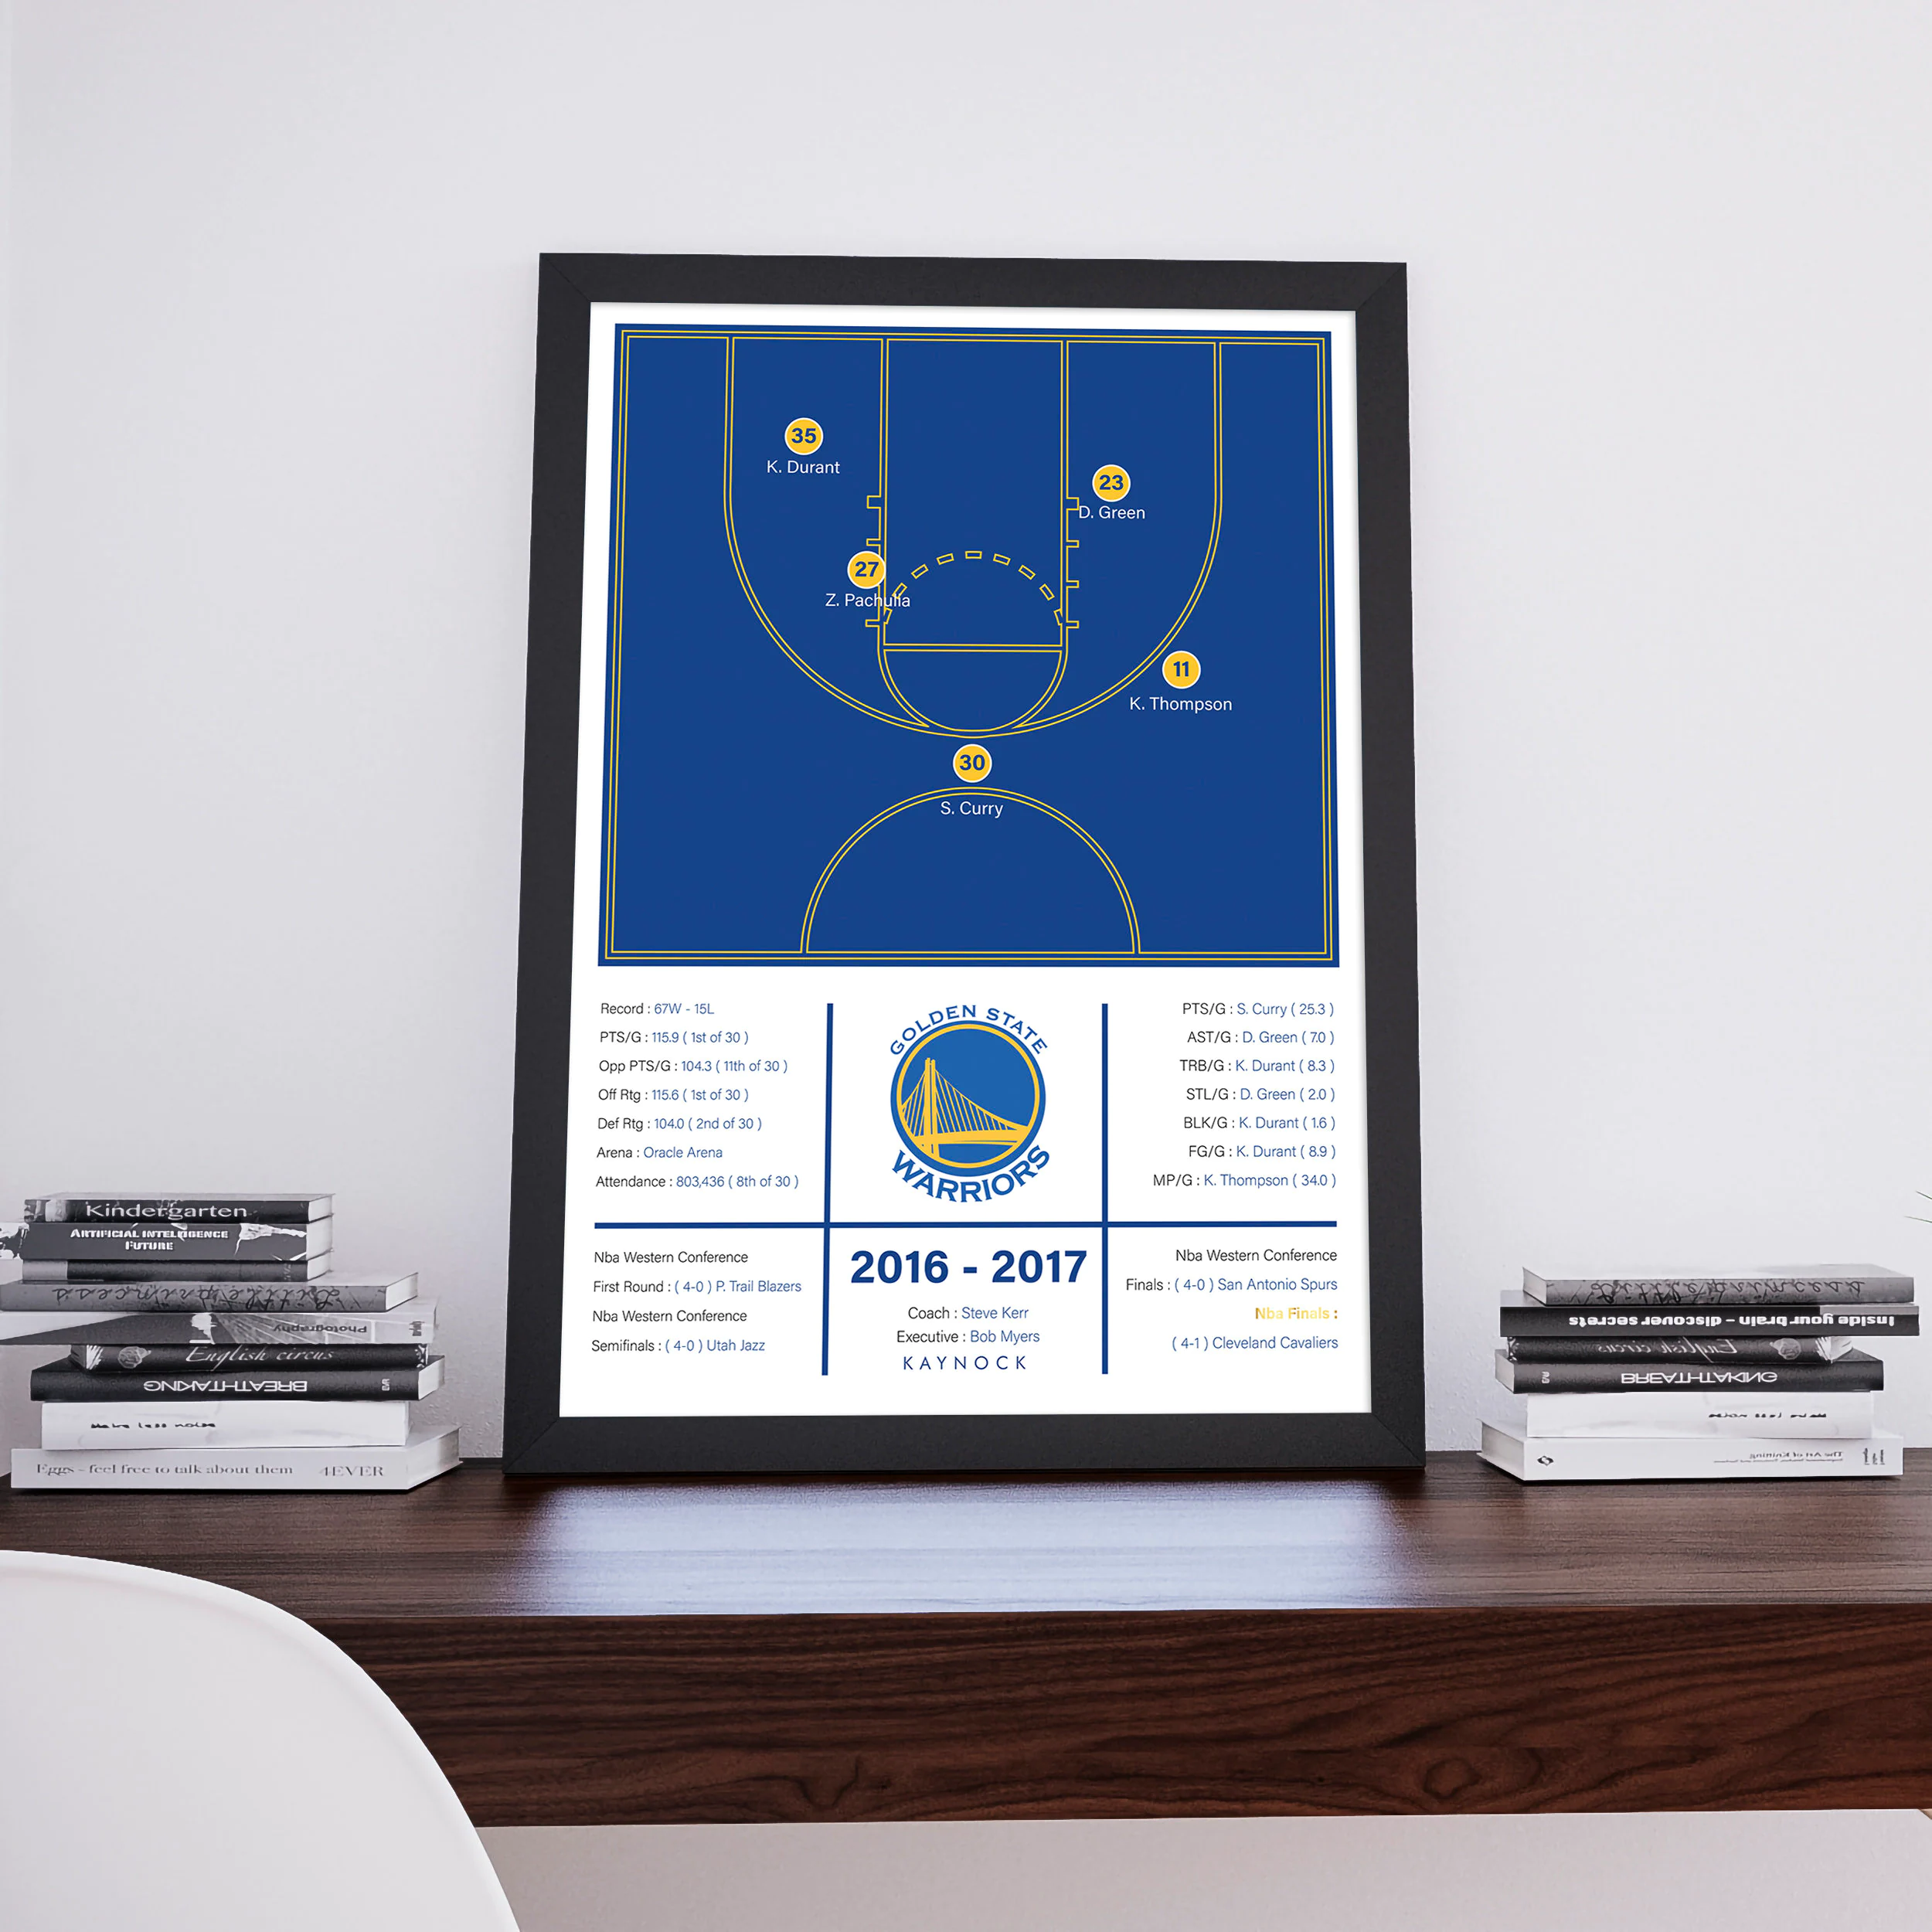 Golden State Warriors 2016 - 2017, Stephen Curry, Kevin Durant, Klay Thompson, Nba Champions, Basketball Illustration, Print Art, Poster